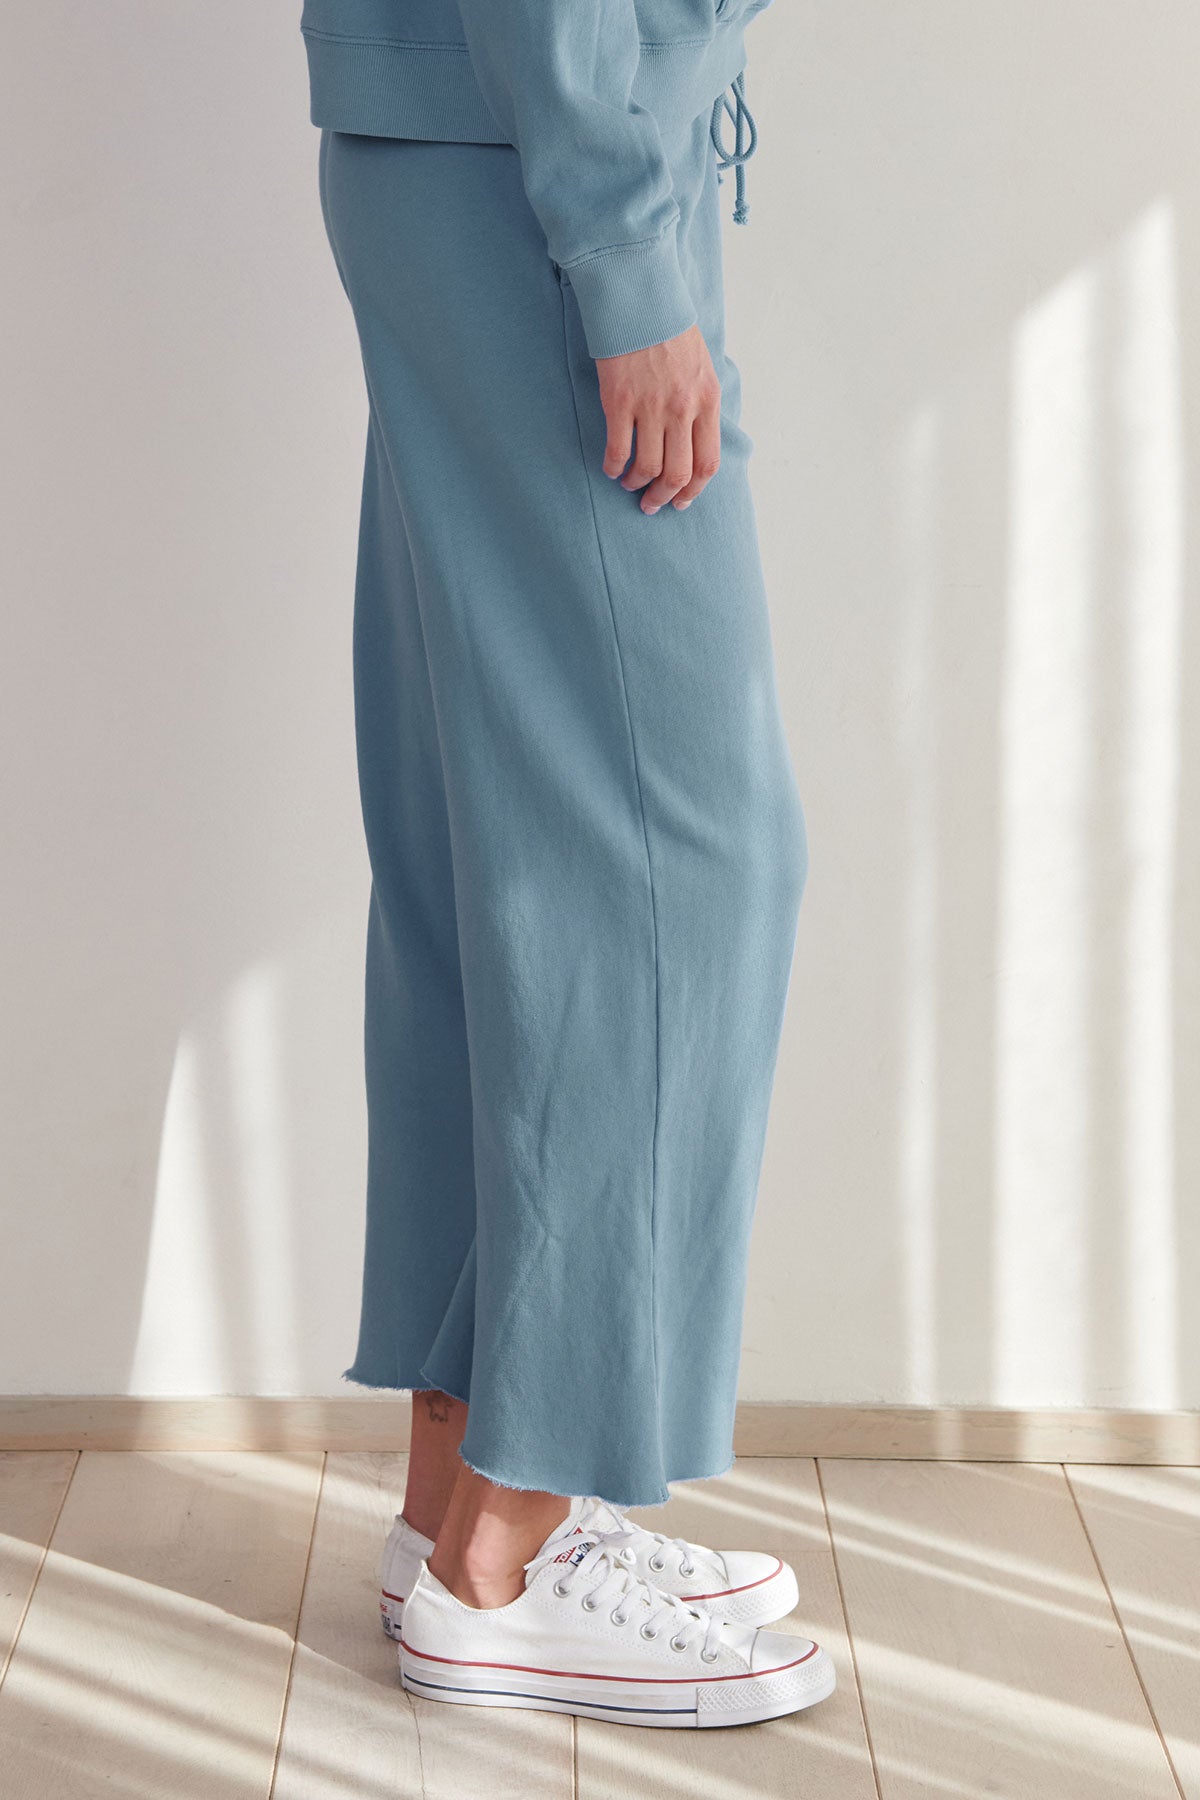 A woman wearing blue Montecito sweatpants by Velvet by Jenny Graham and white sneakers.-36212537688257